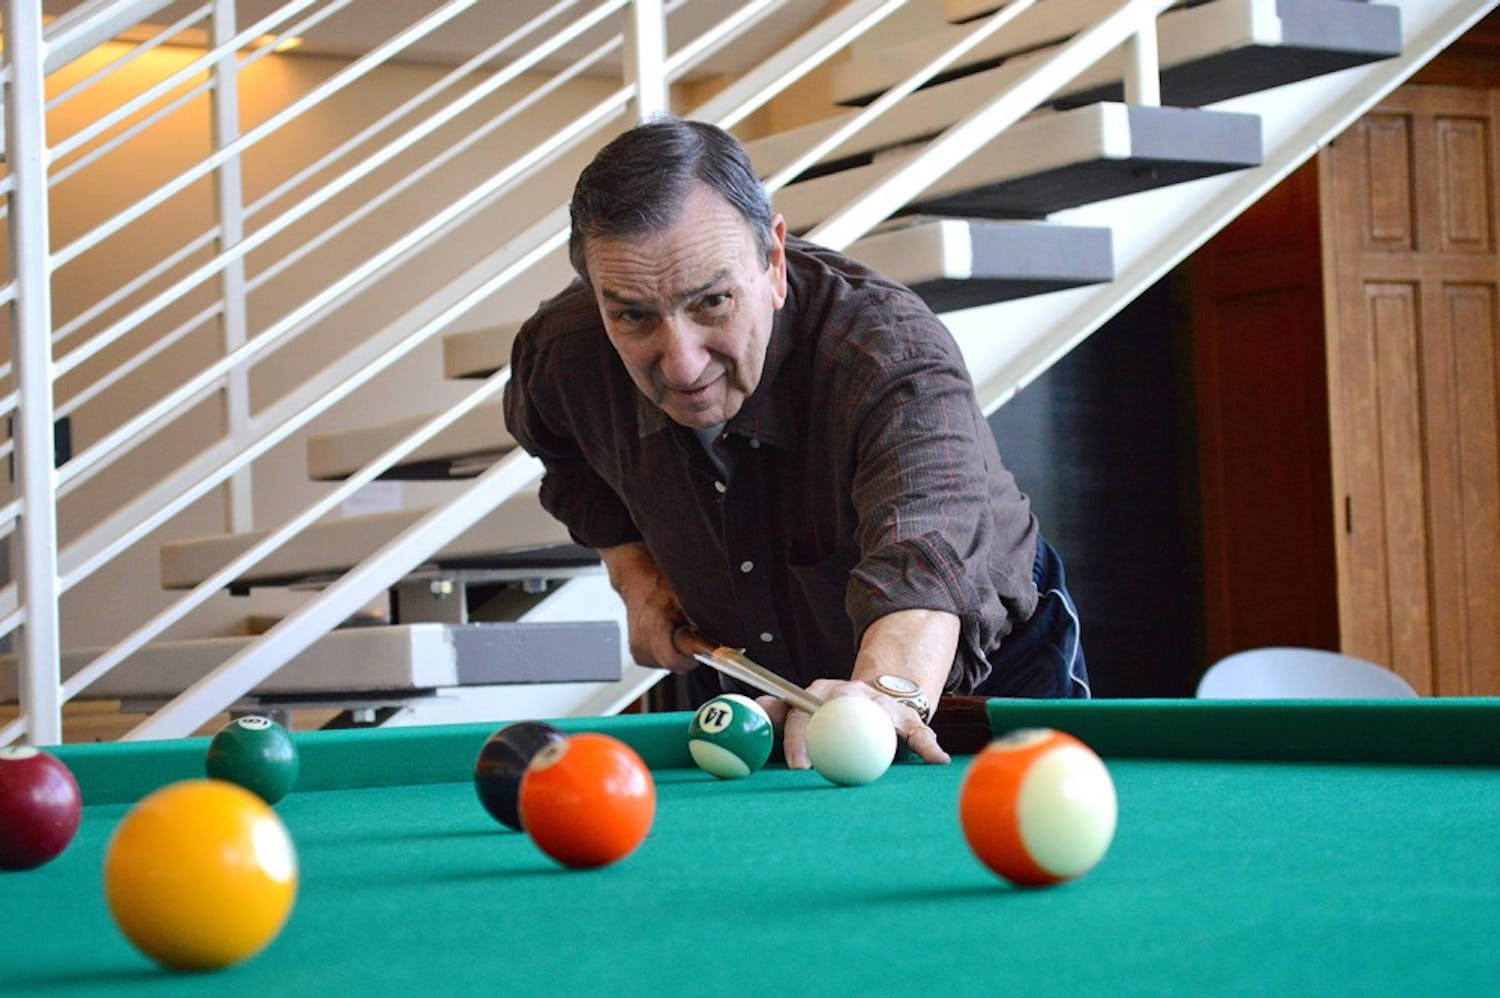 Orange County senior Joe Acciarito shoots pool at the Robert and Pearl Seymour Center in Chapel Hill, which he visits six times a week.